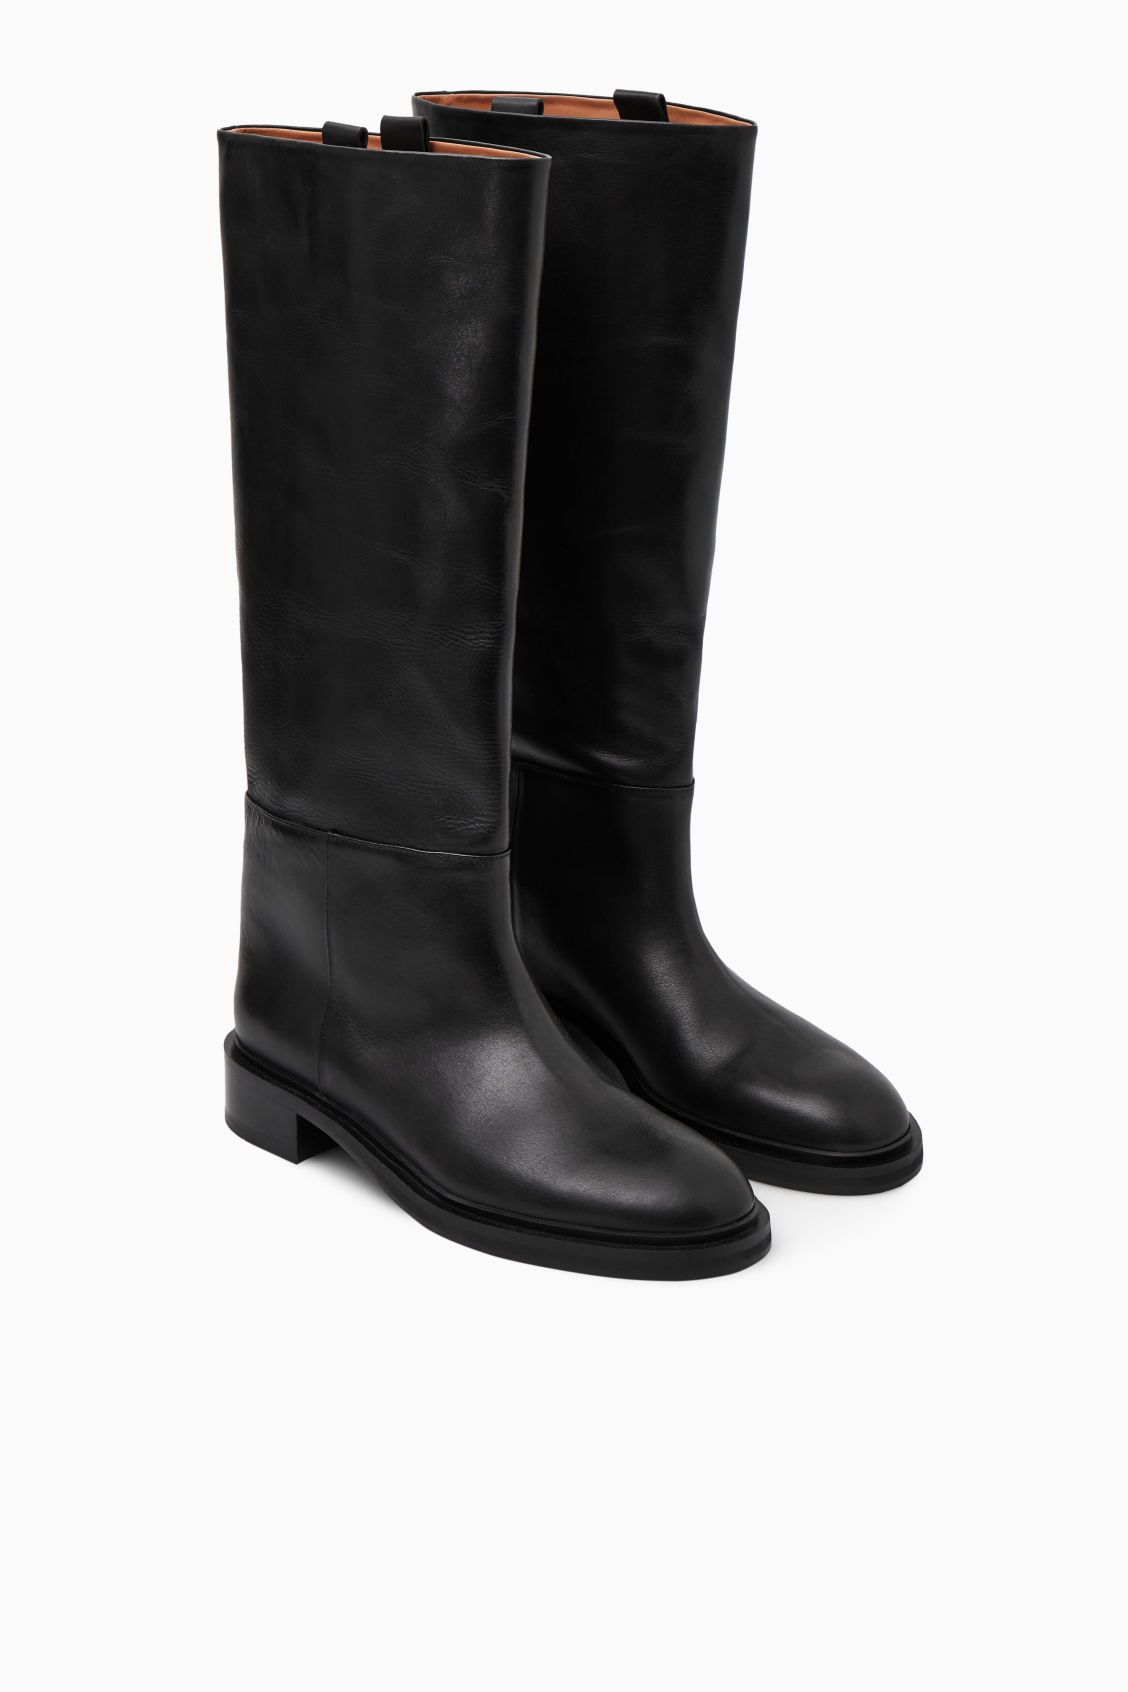 LEATHER RIDING BOOTS - BLACK - Shoes - COS | COS (US)